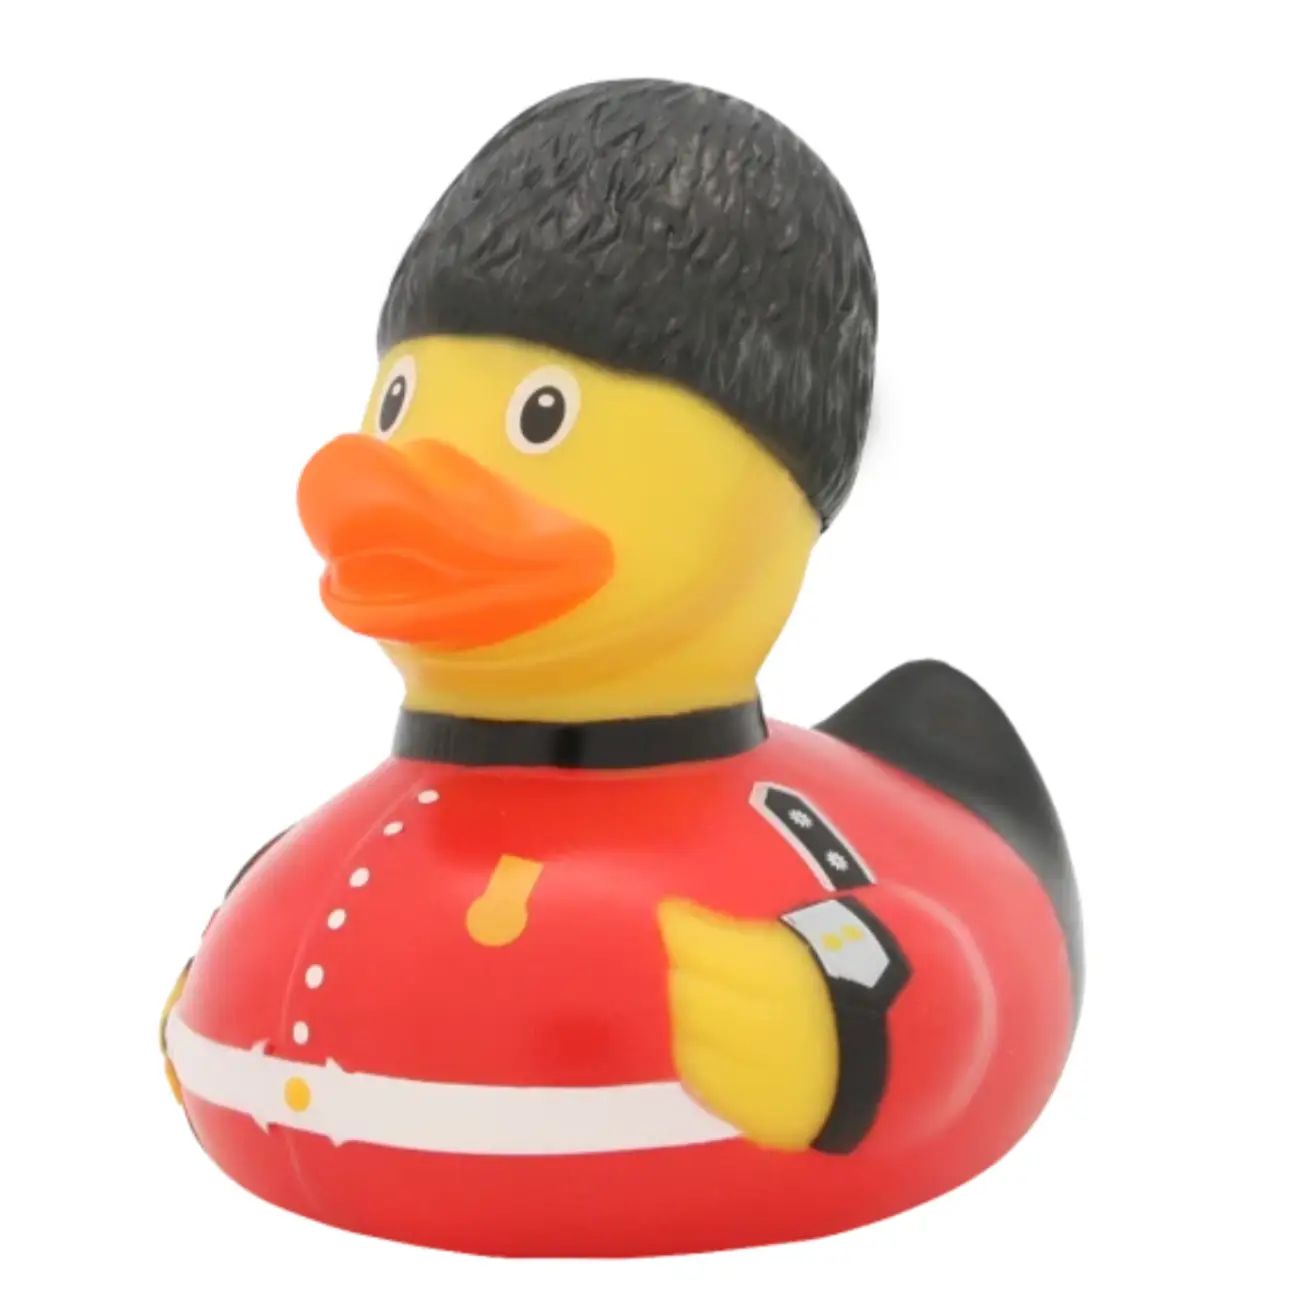 Guardsman Rubber Duck Left Side Angle View